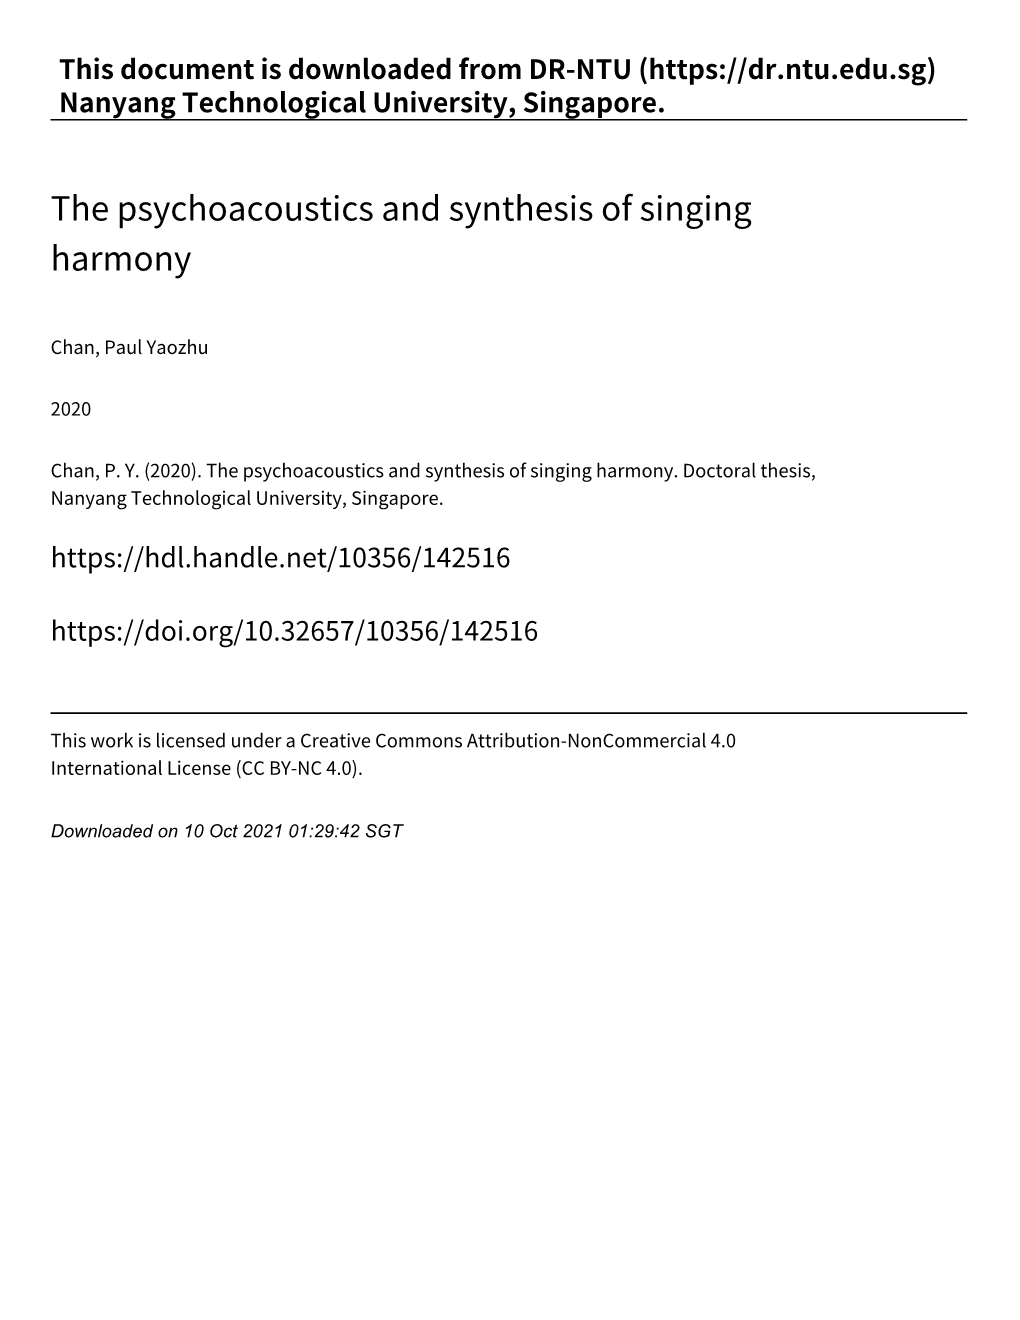 The Psychoacoustics and Synthesis of Singing Harmony